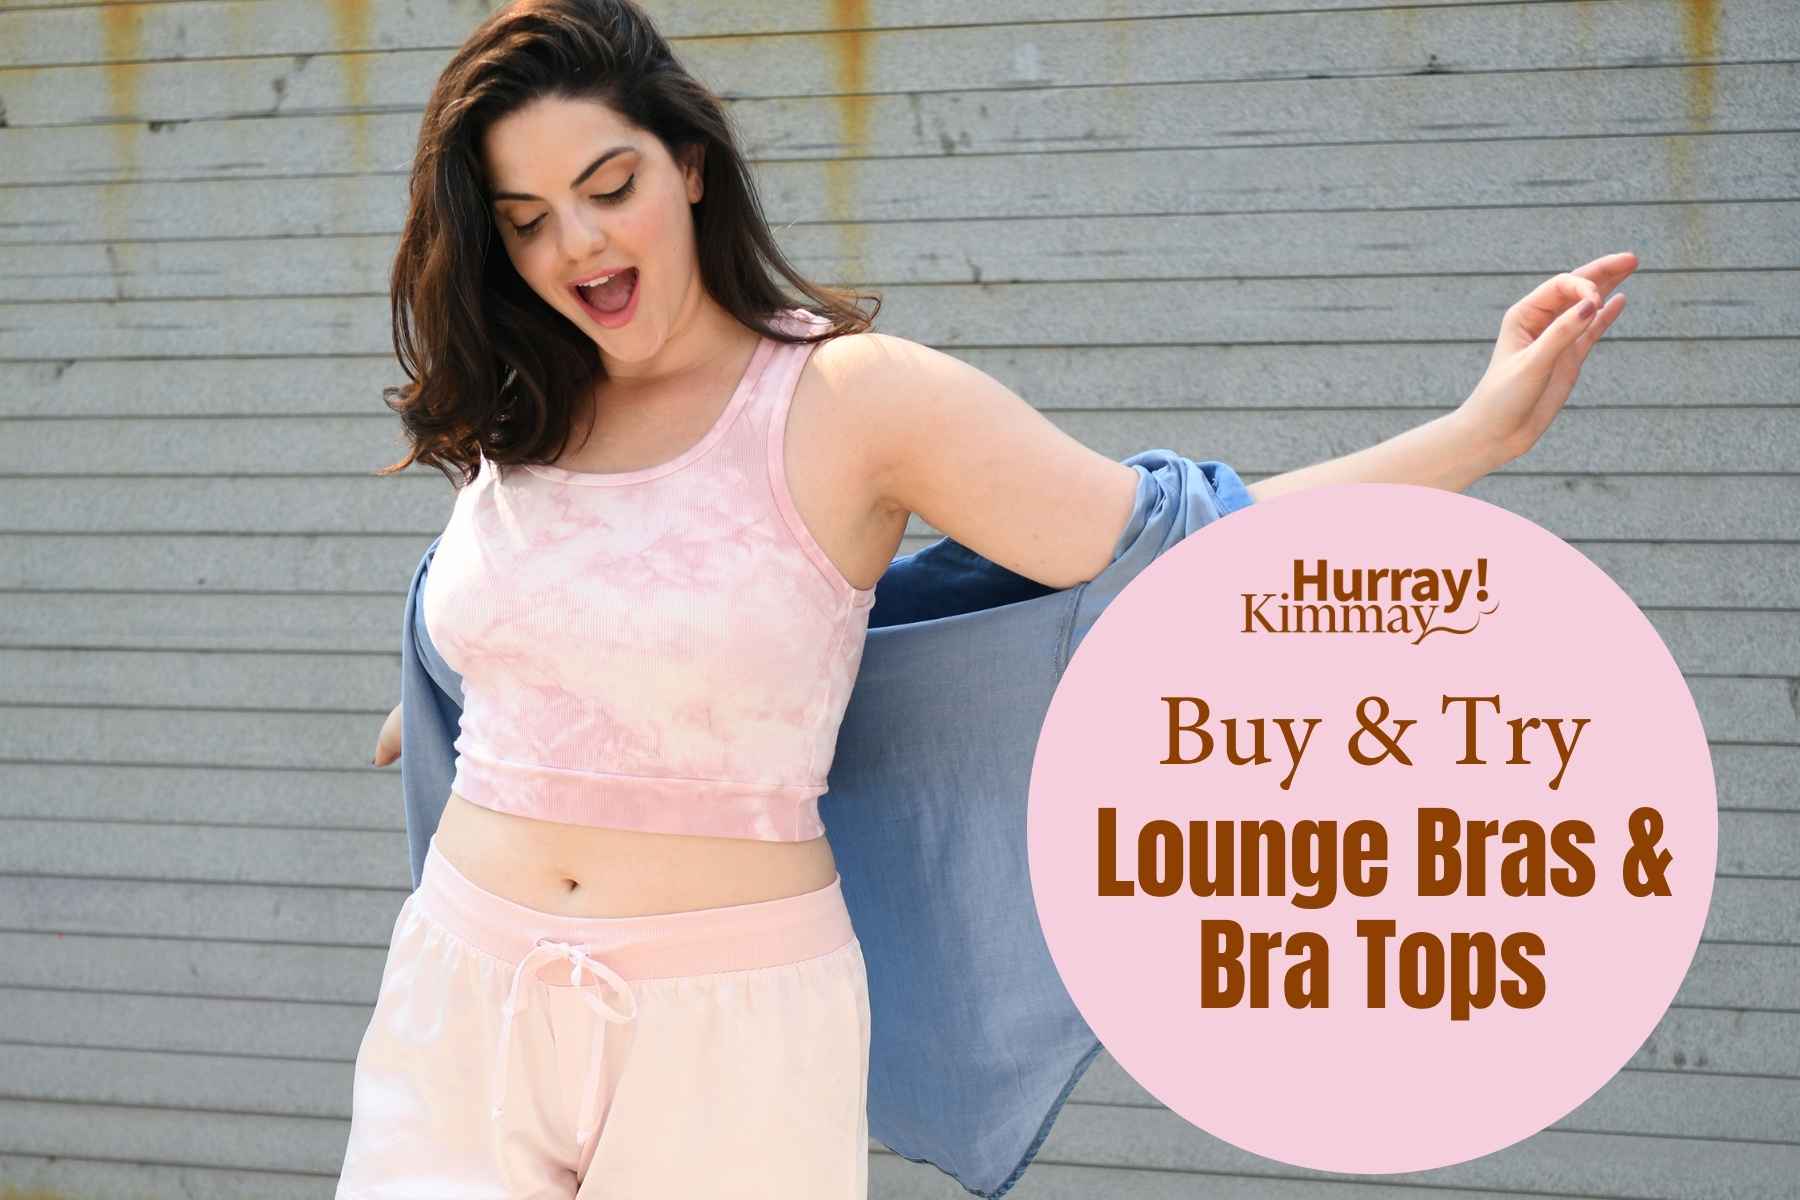 https://hurraykimmay.com/wp-content/uploads/2021/08/Buy-Try-Lounge-Bras-and-Tops.jpg